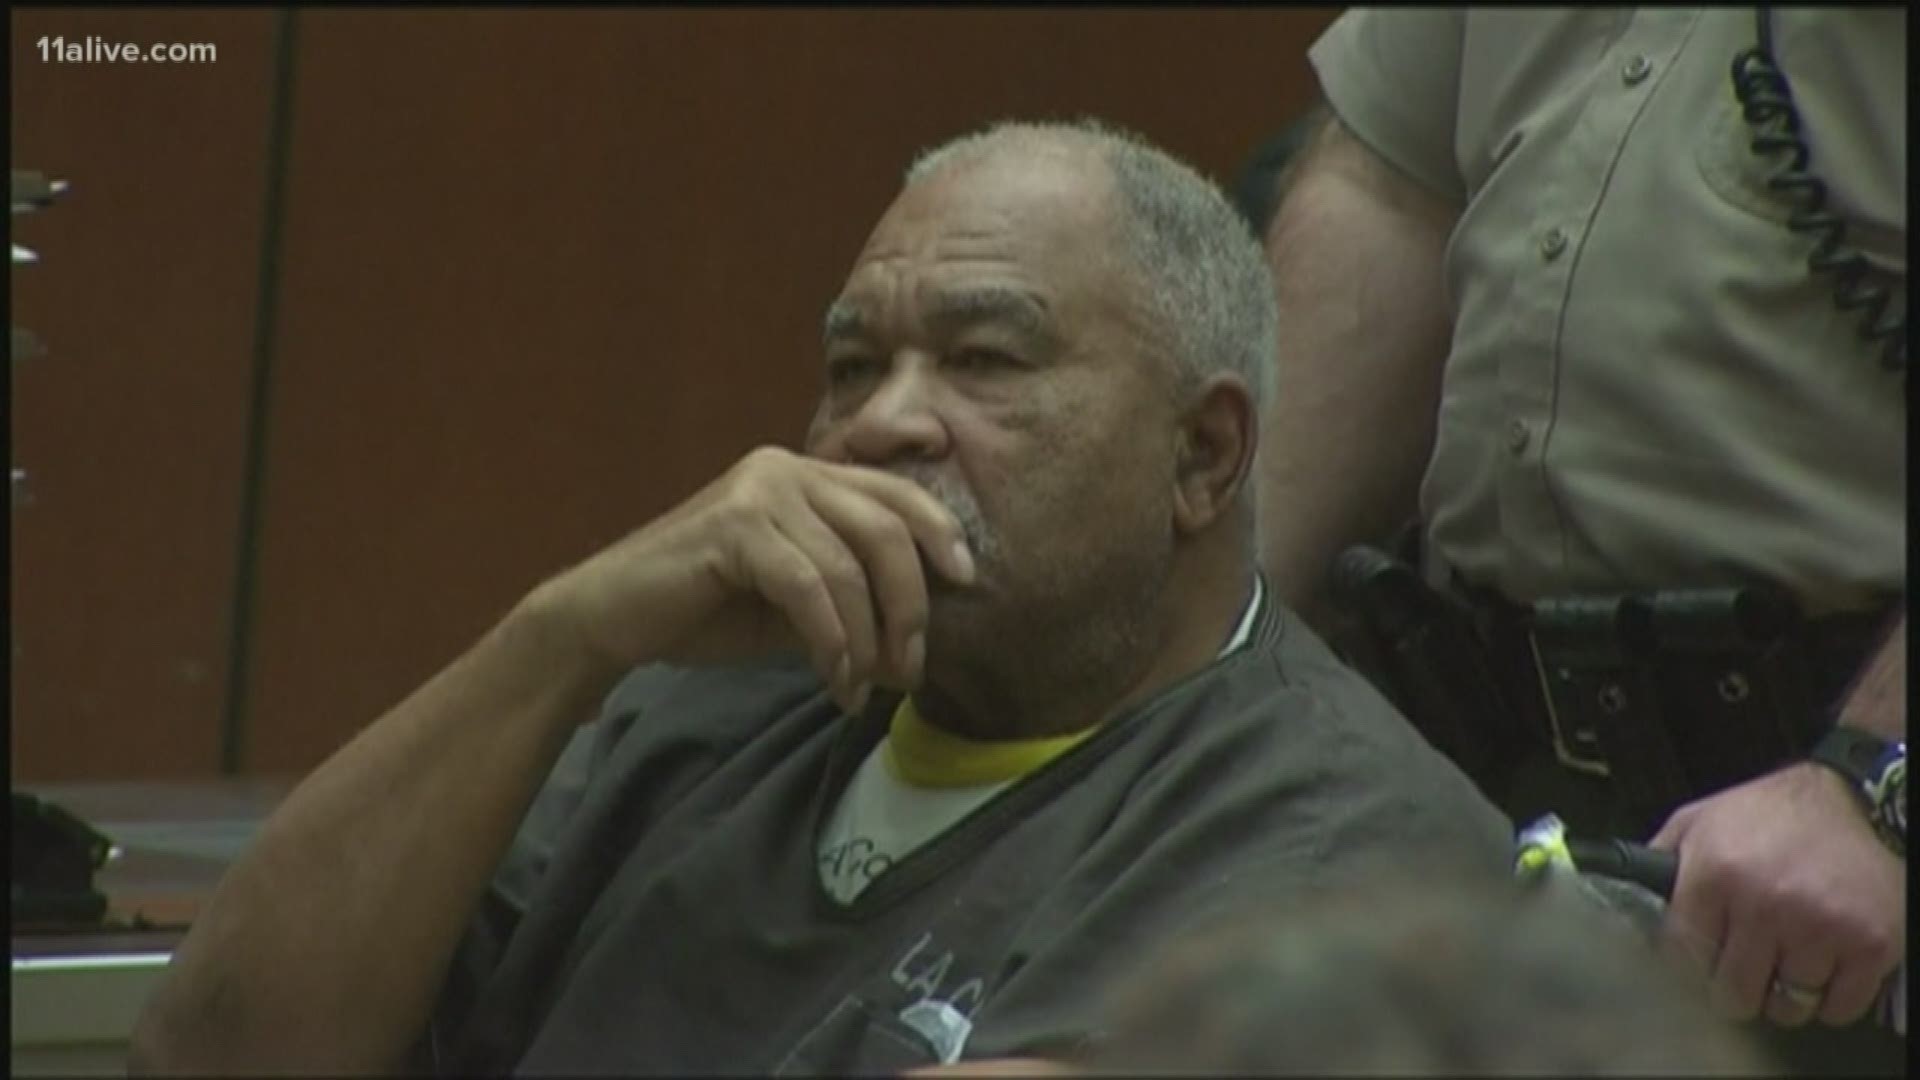 Samuel Little claims he killed more than 90 people across the U.S.